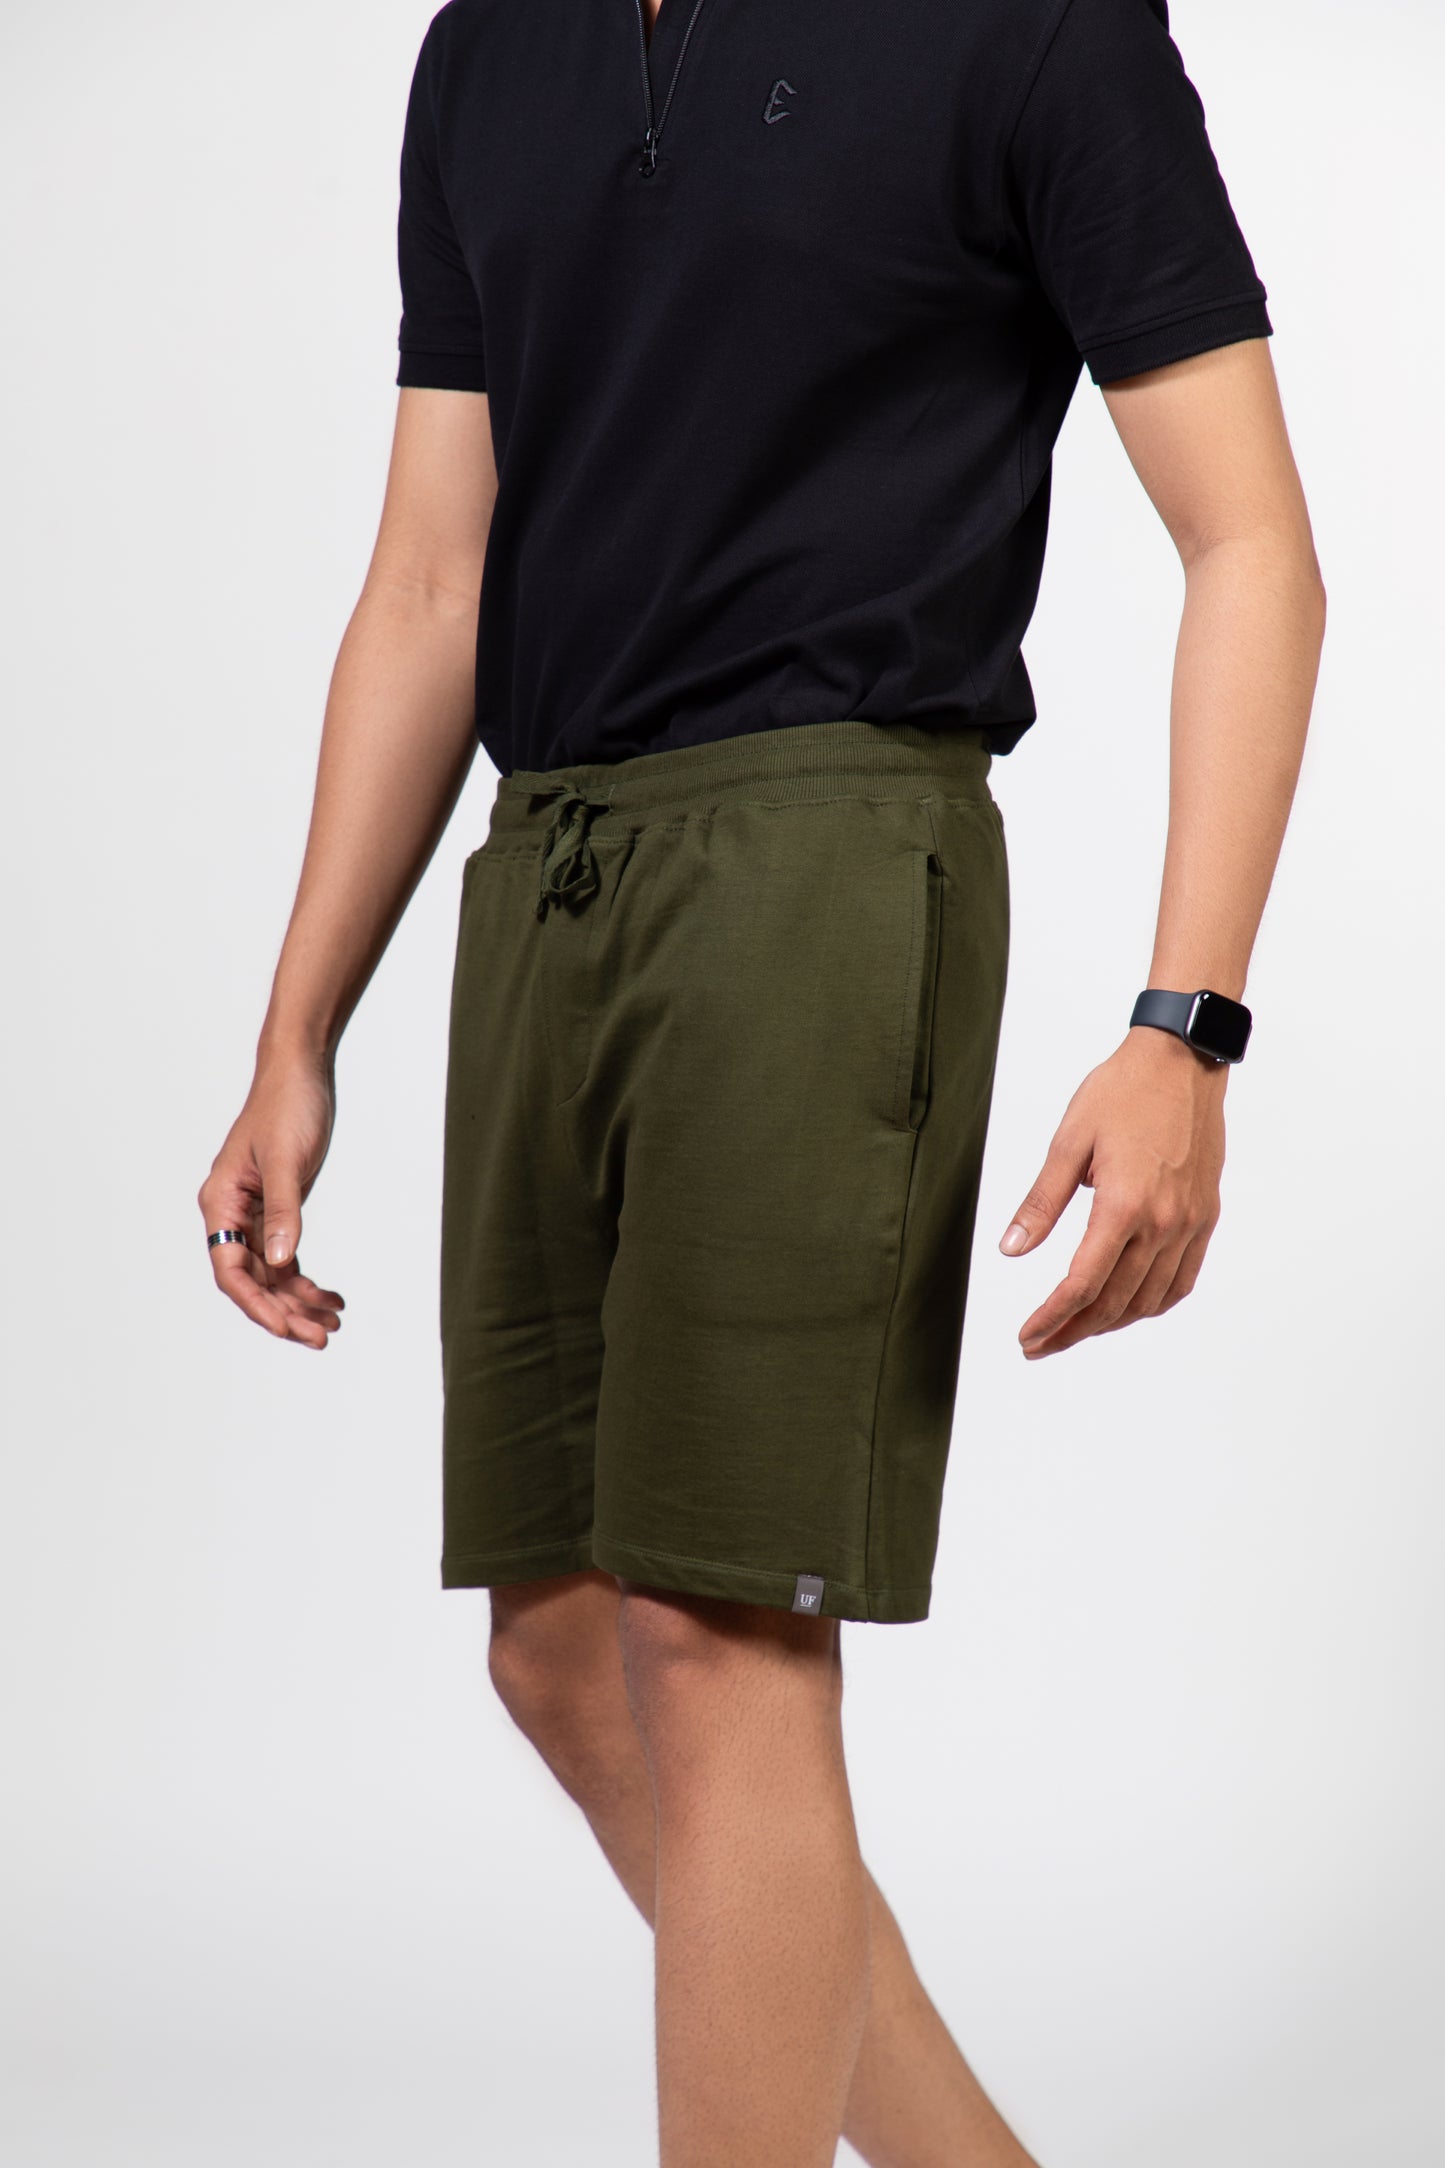 Urban Finesse Solids shorts olive green